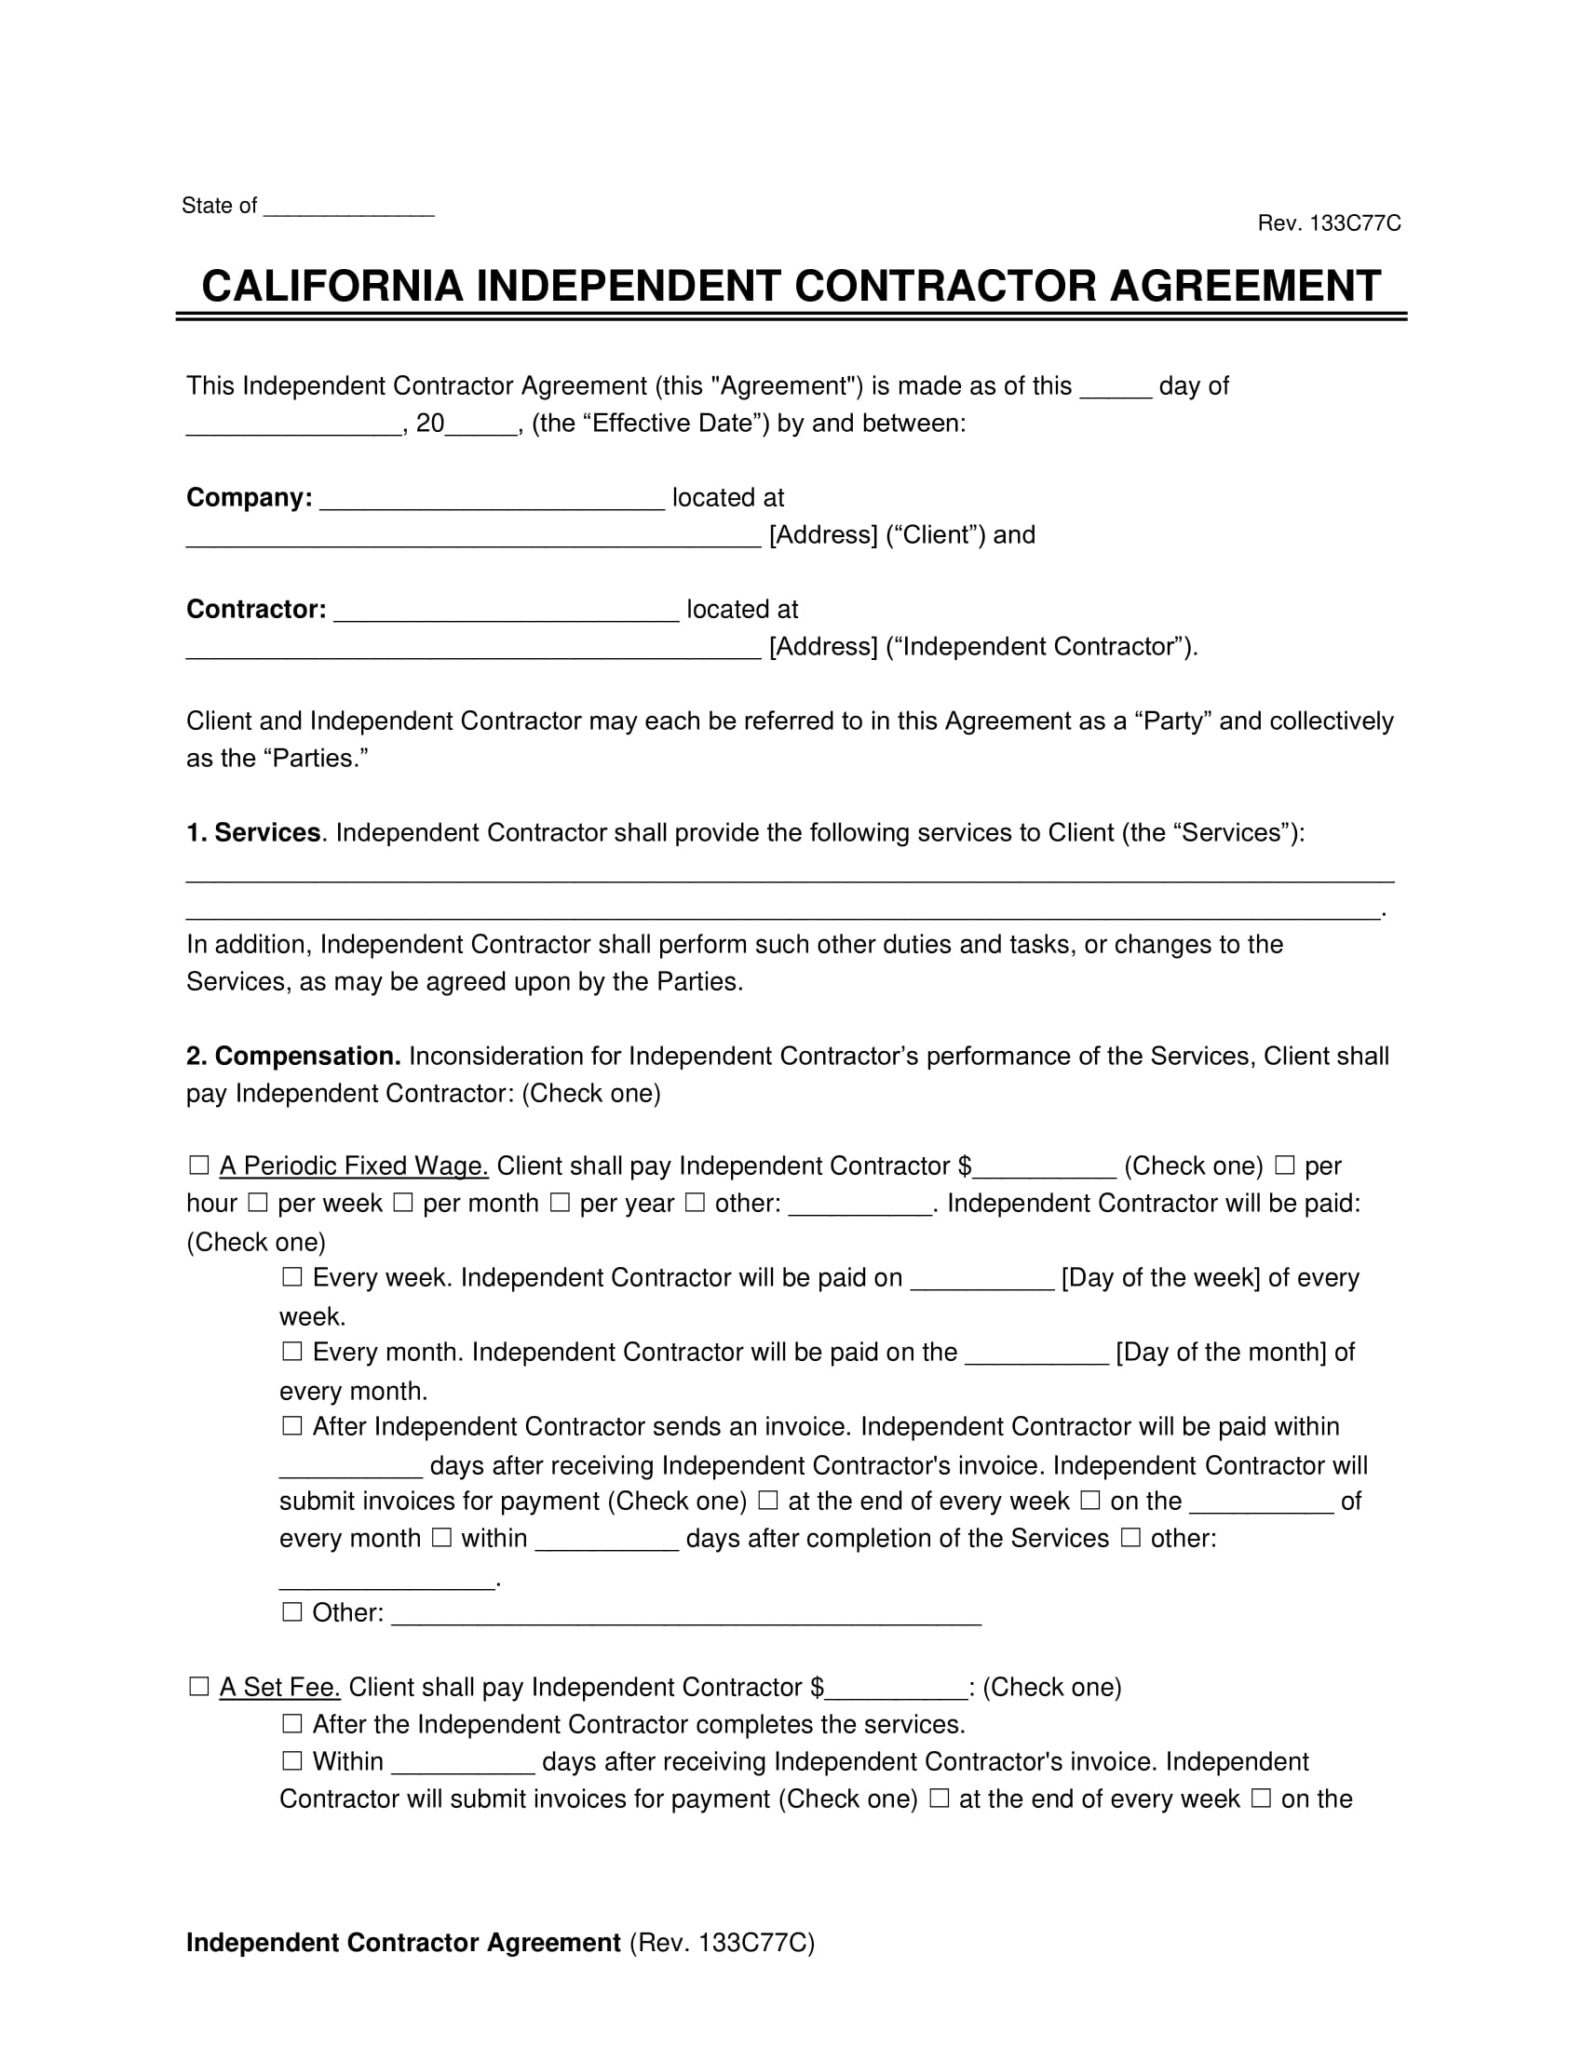 free-california-independent-contractor-agreement-pdf-word